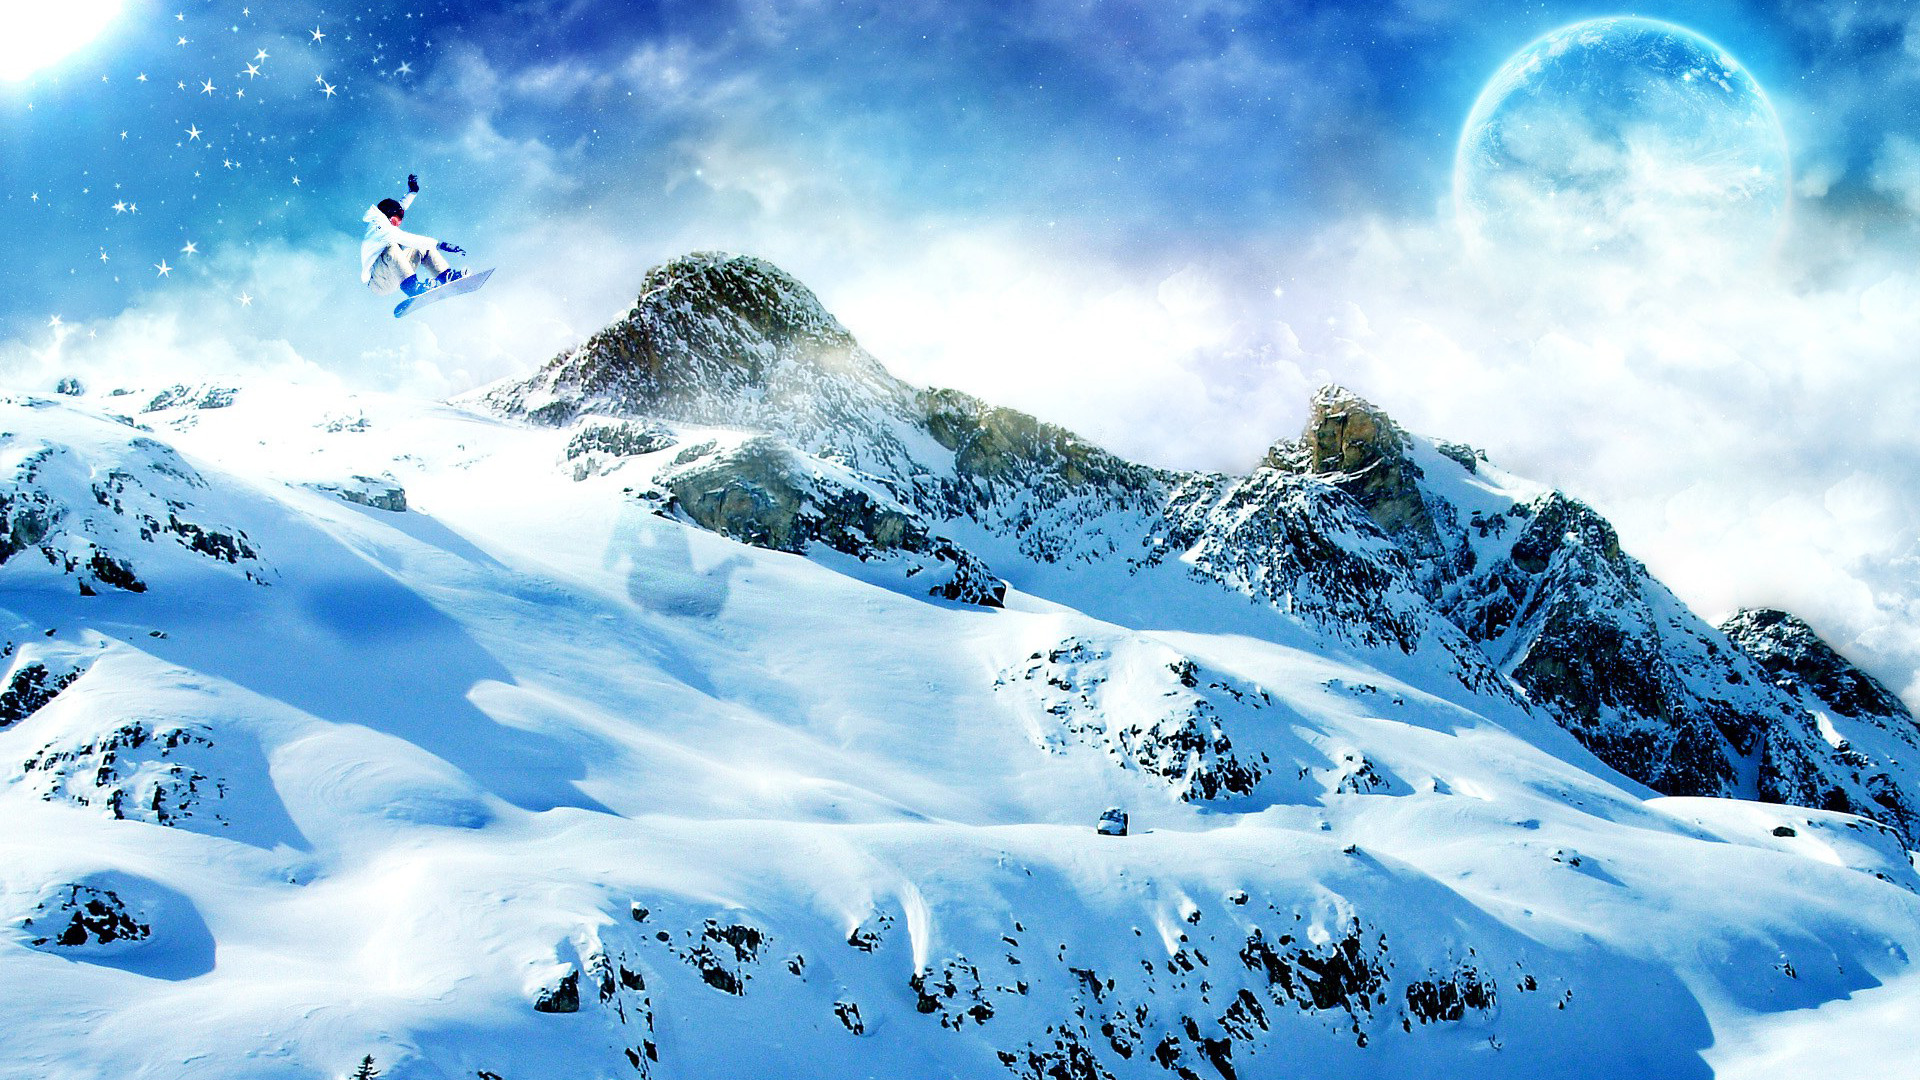 Download Planet over snowy mountains wallpaper